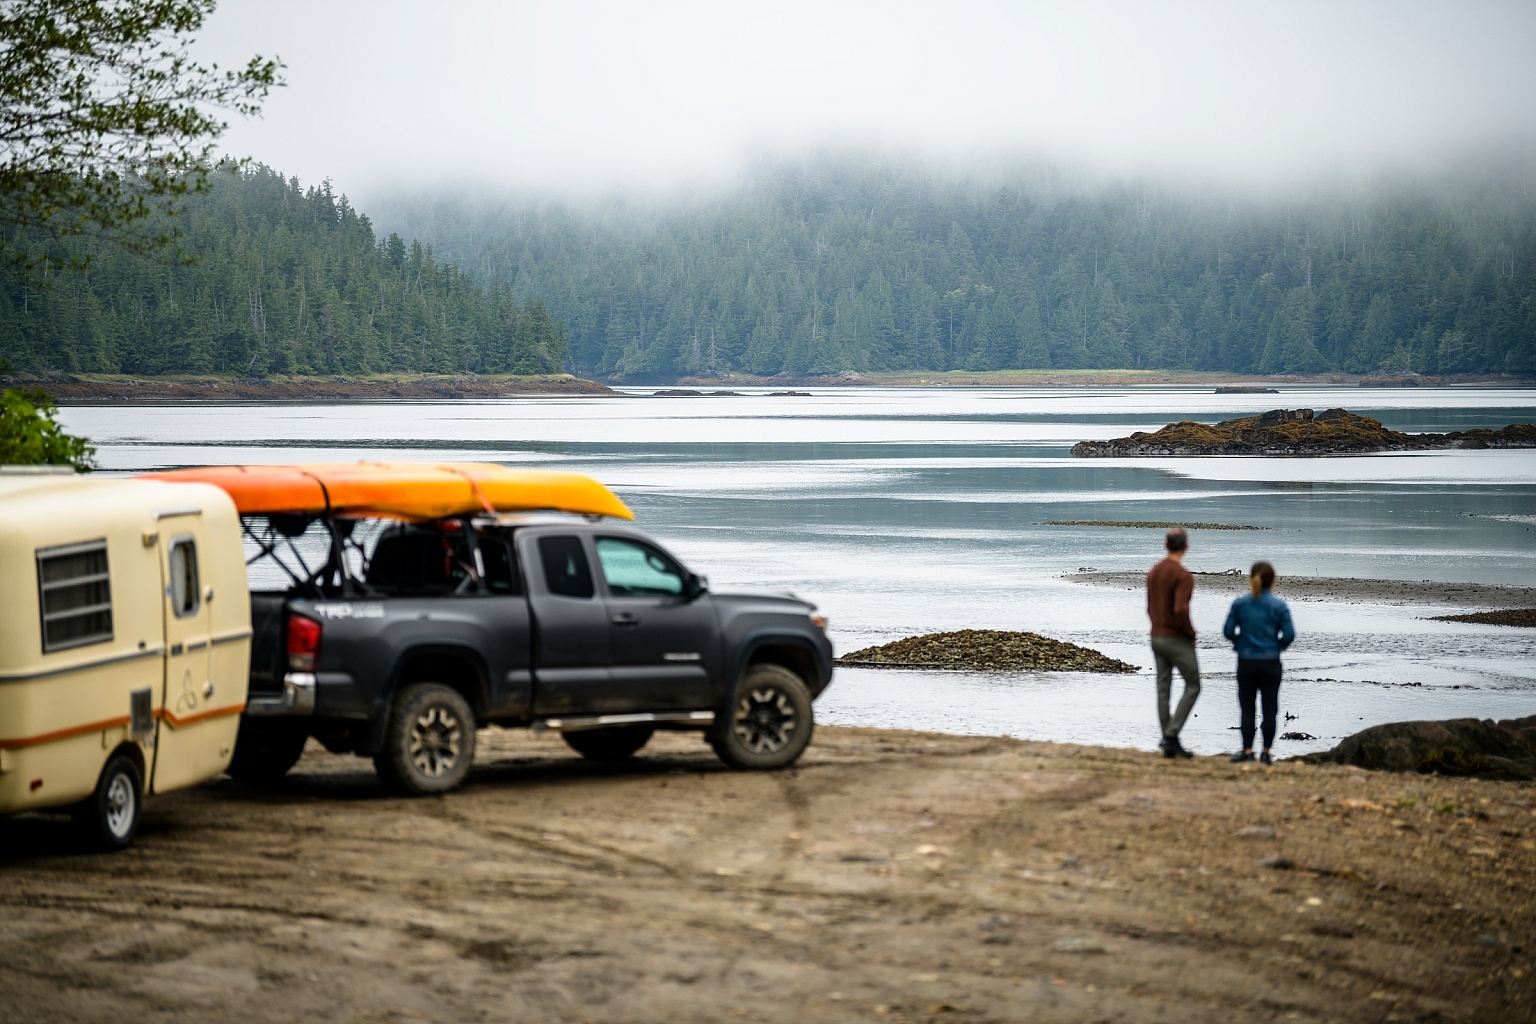 Two people stand at the shore looking out at the ocean. Fog covers the tops of the trees. A truck with two yellow kayaks pulling a trailer is parked on the beach.